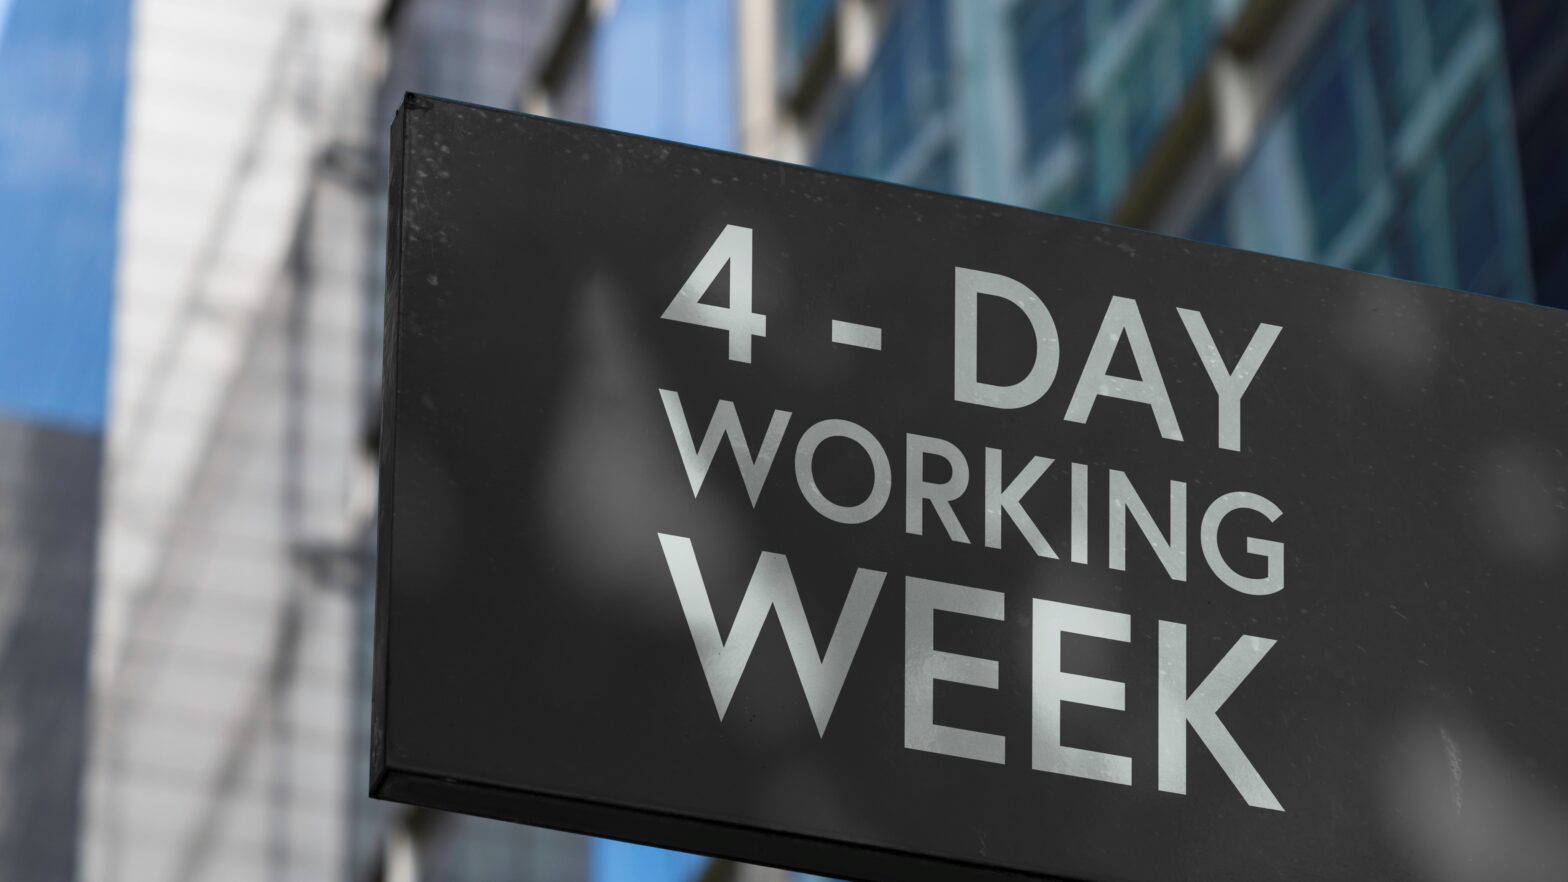 Third of companies say four-day week inevitable within 10 years